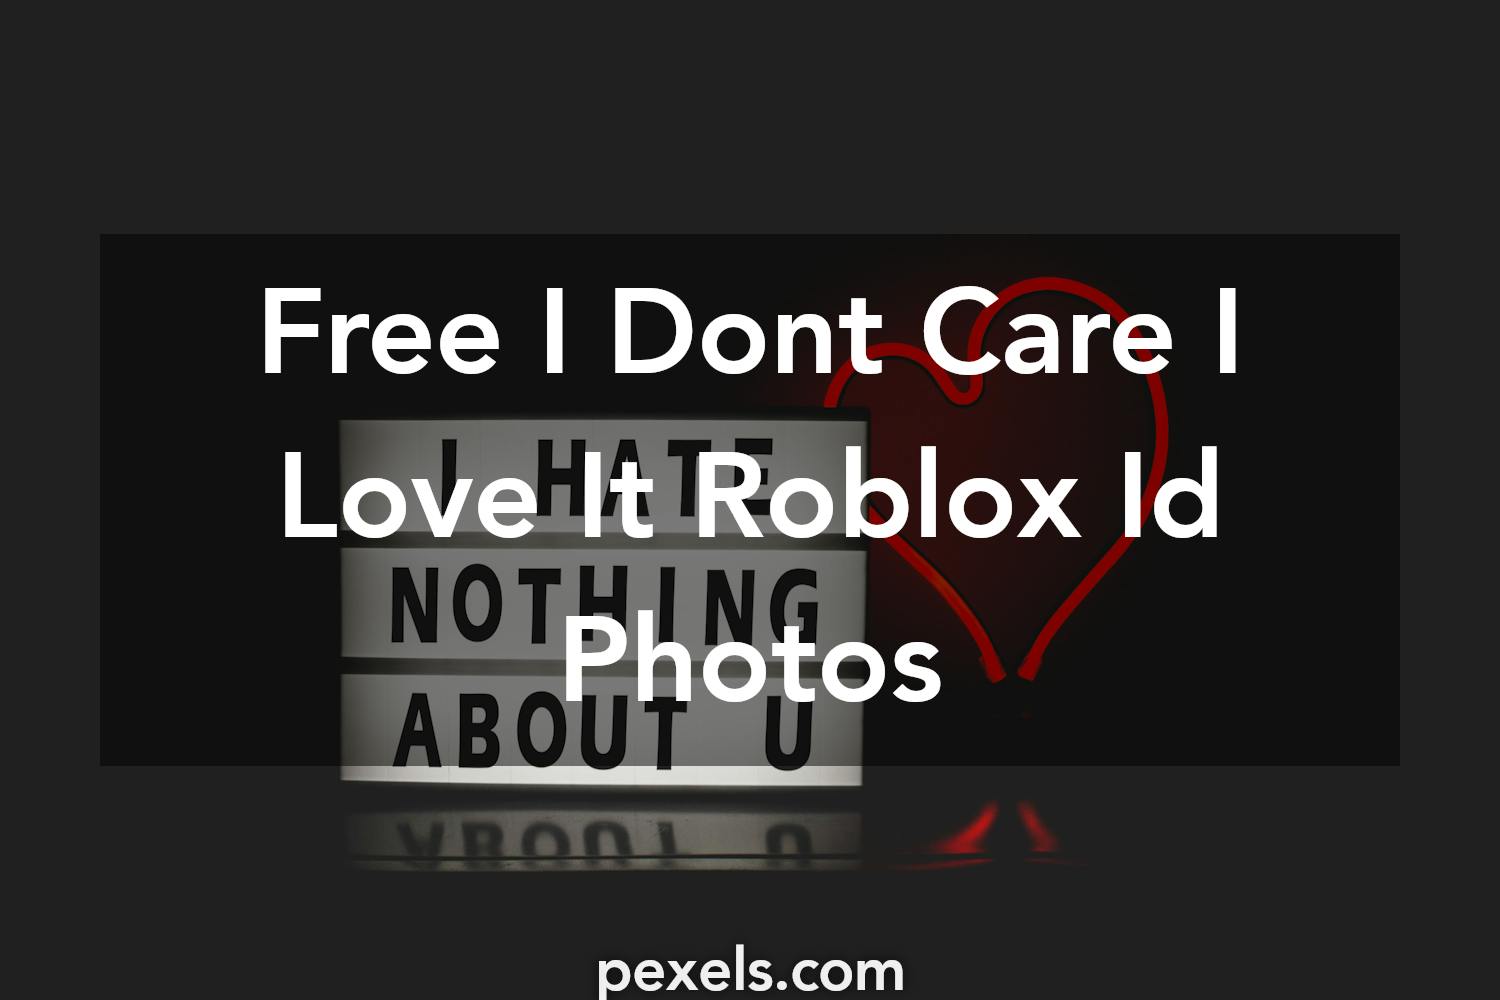 1000 Roblox Ids - 1000 roblox id codes youtube